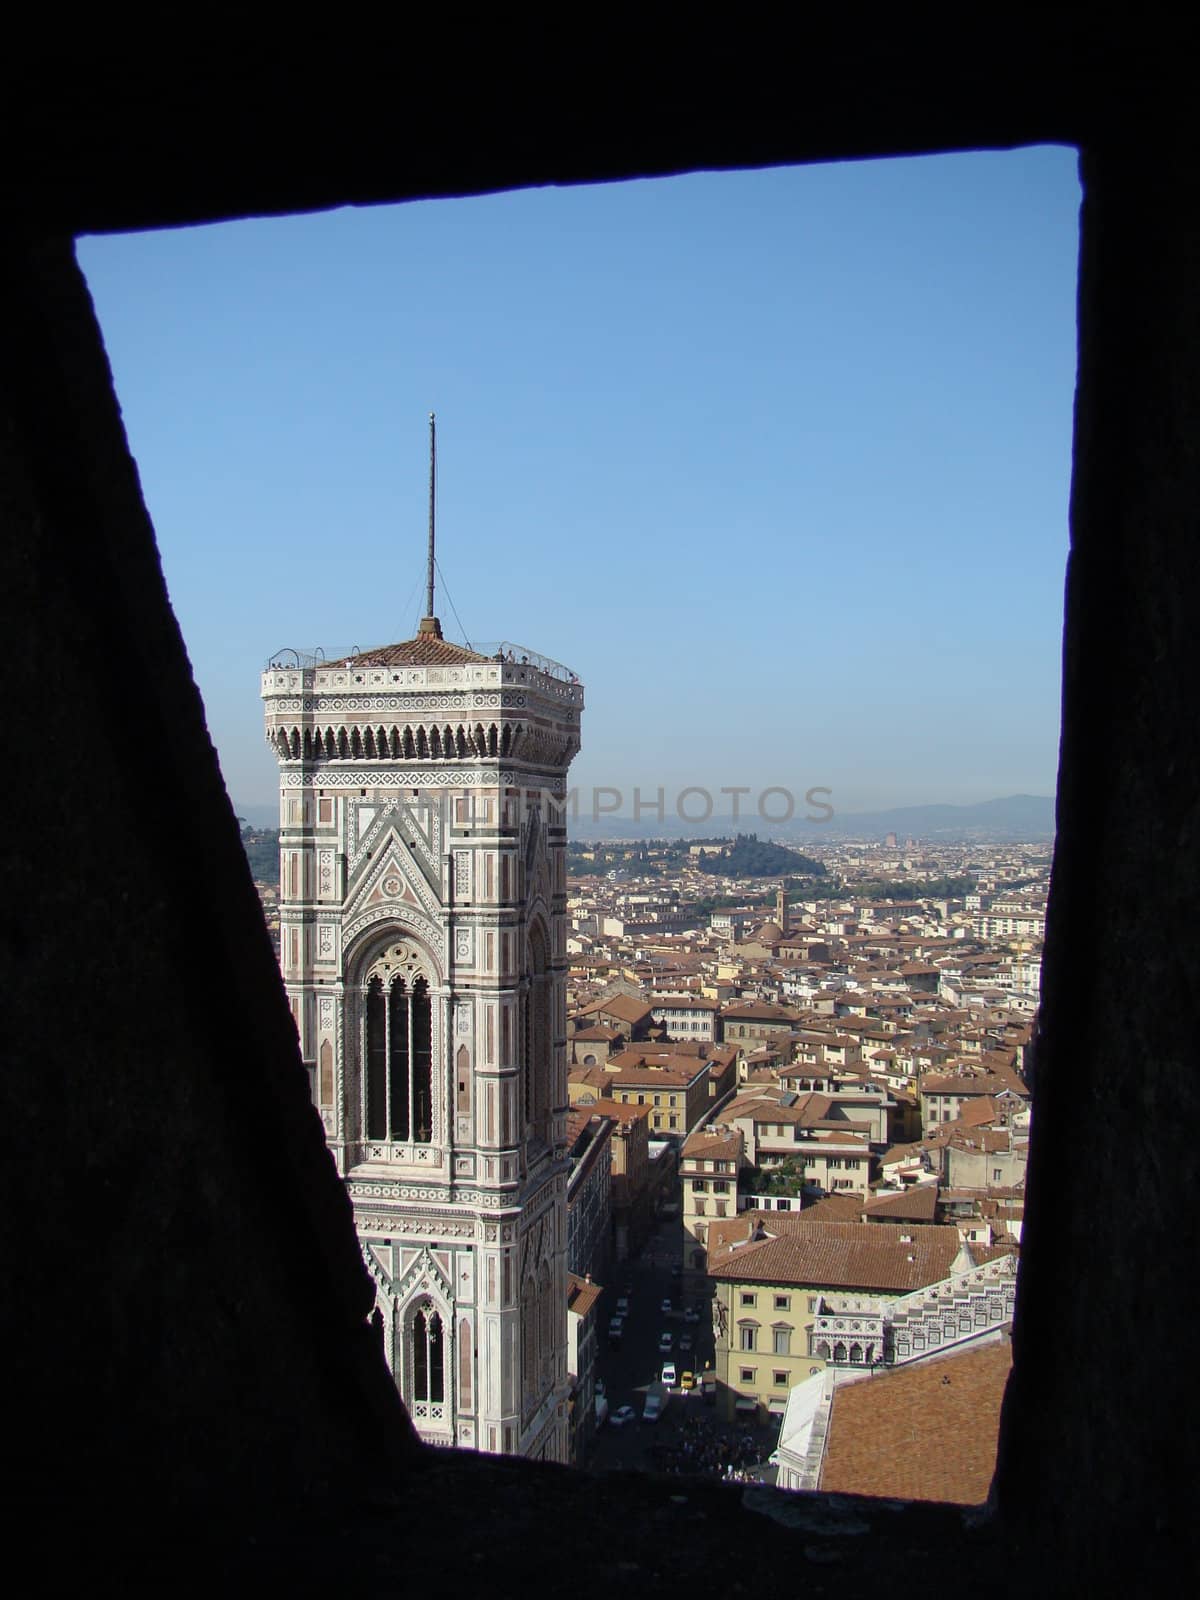 Campanile di Giotto in Florence seen from 
the cupola of the cathedral Santa Maria del Fiore, Tuscany, Italy.
